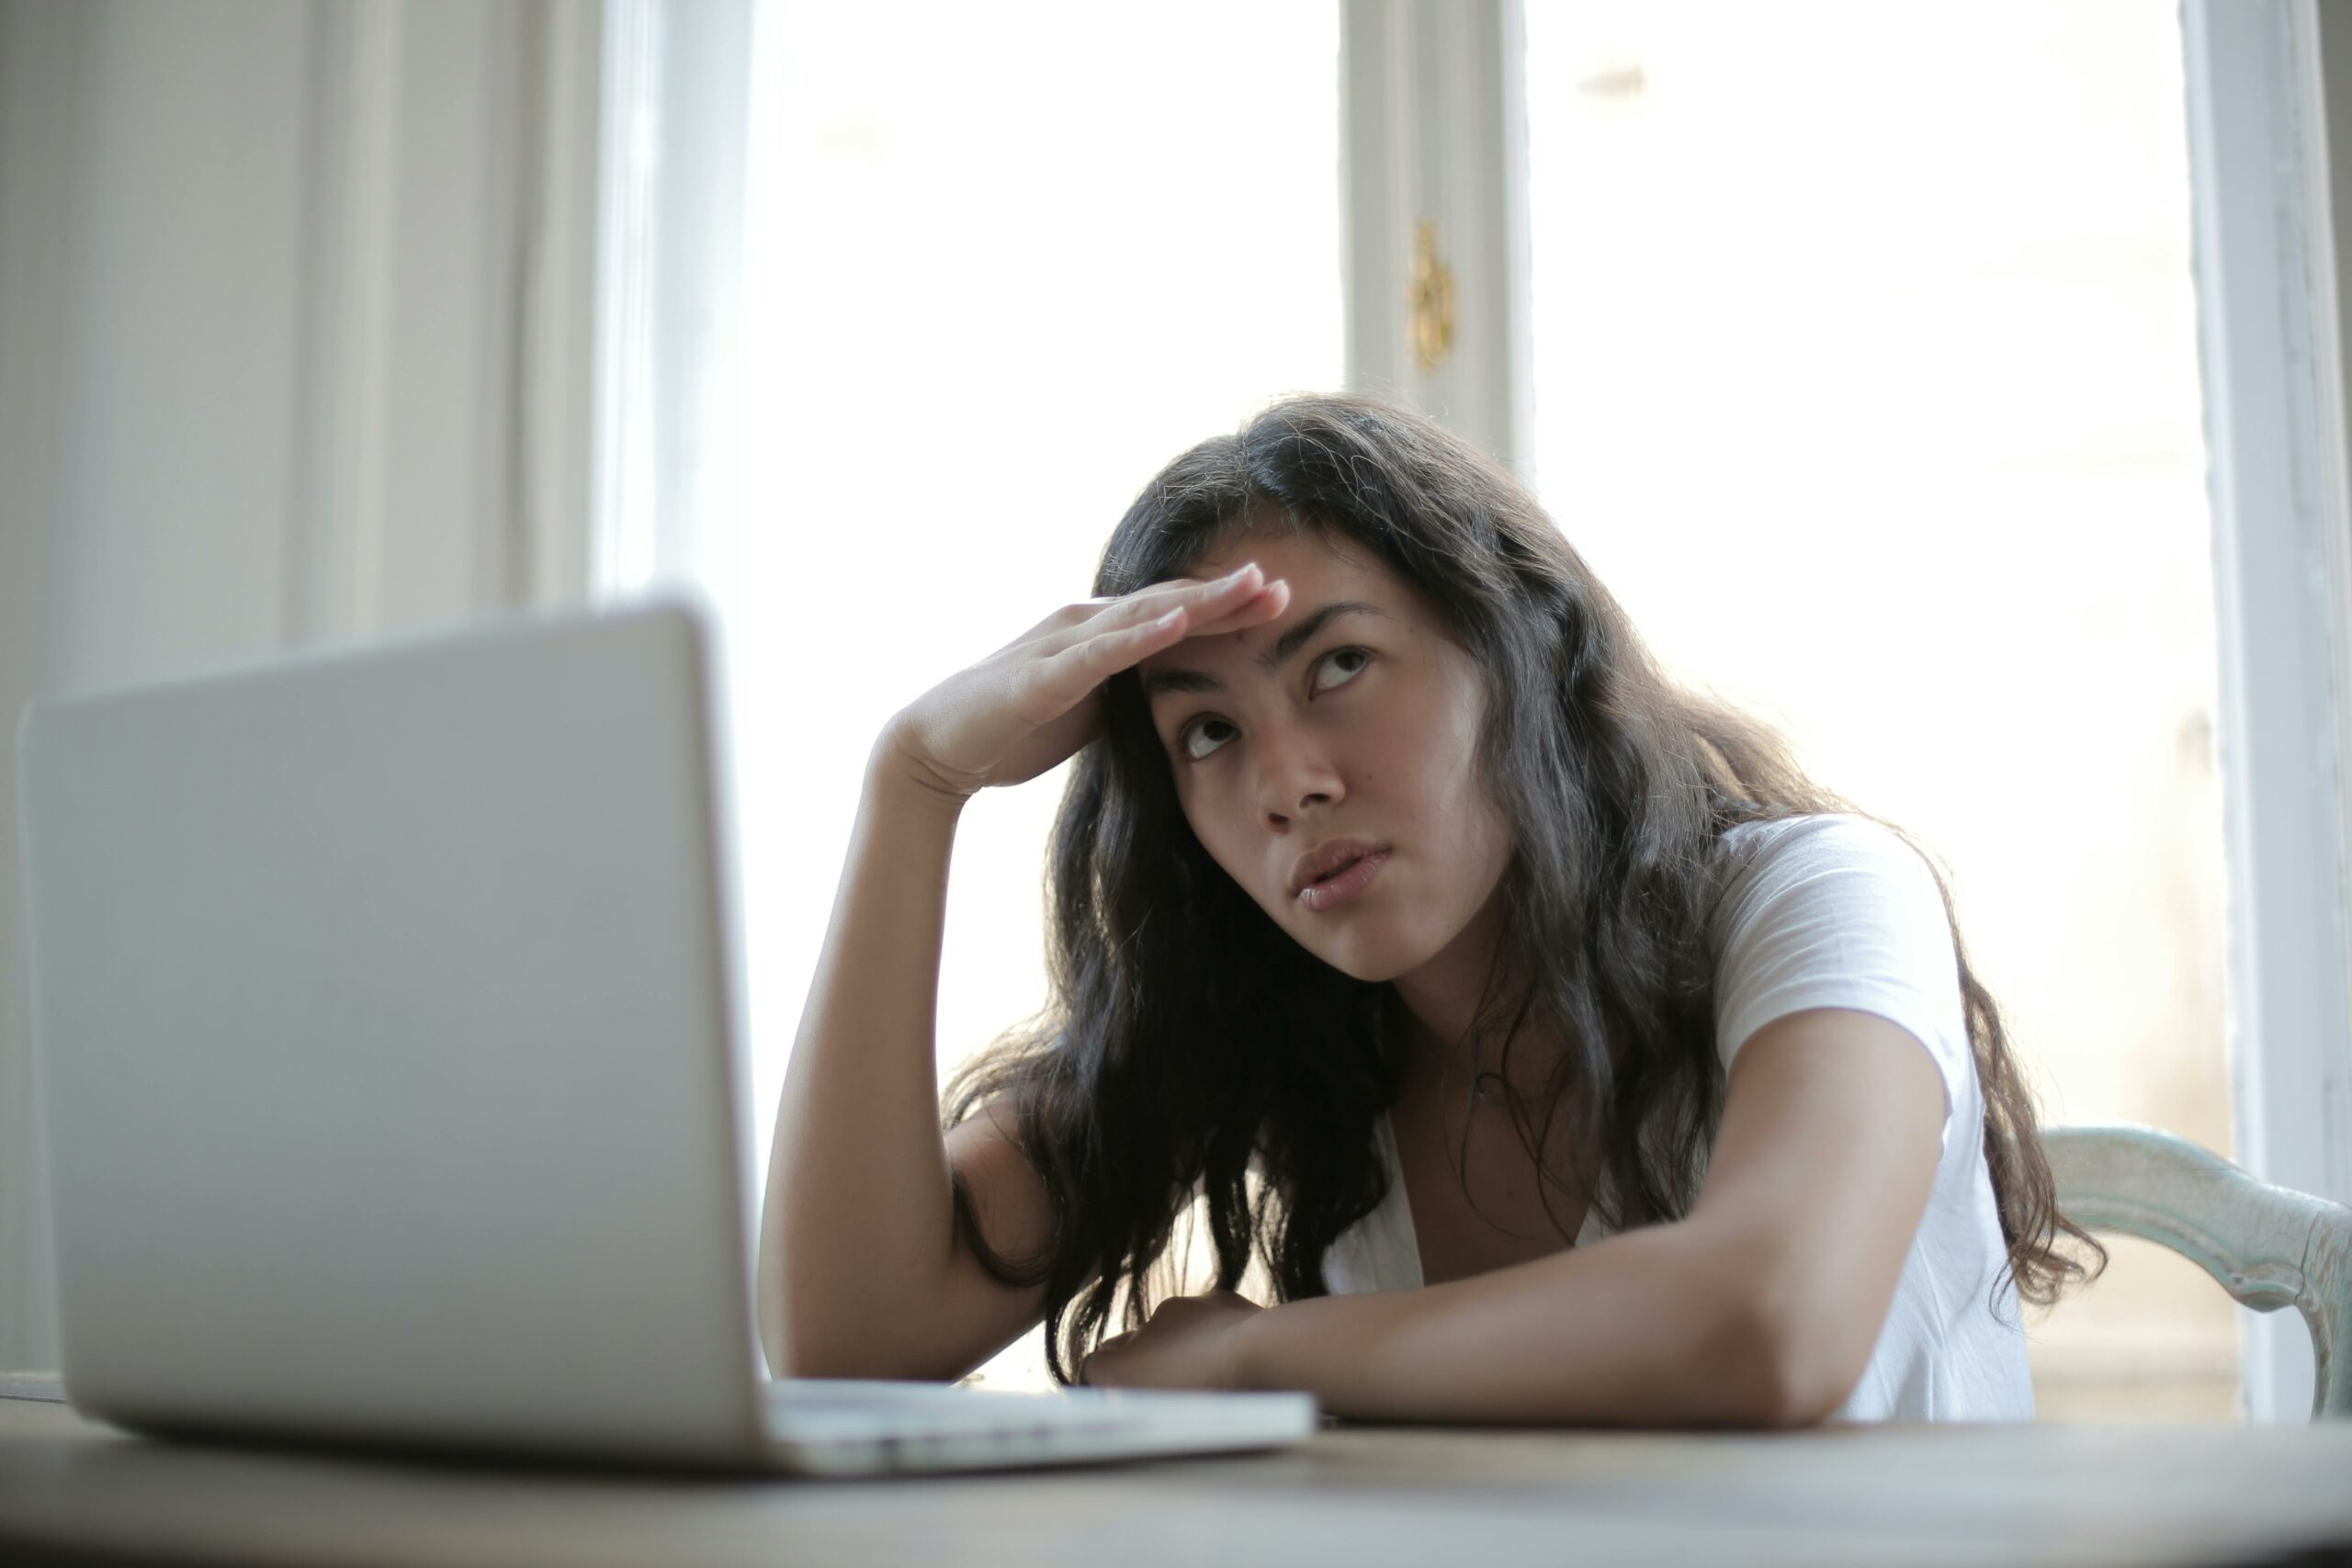 Understanding financial statement image with a woman looking at her laptop confused. Photo by Andrea Piacquadio: https://www.pexels.com/photo/young-annoyed-female-freelancer-using-laptop-at-home-3808008/